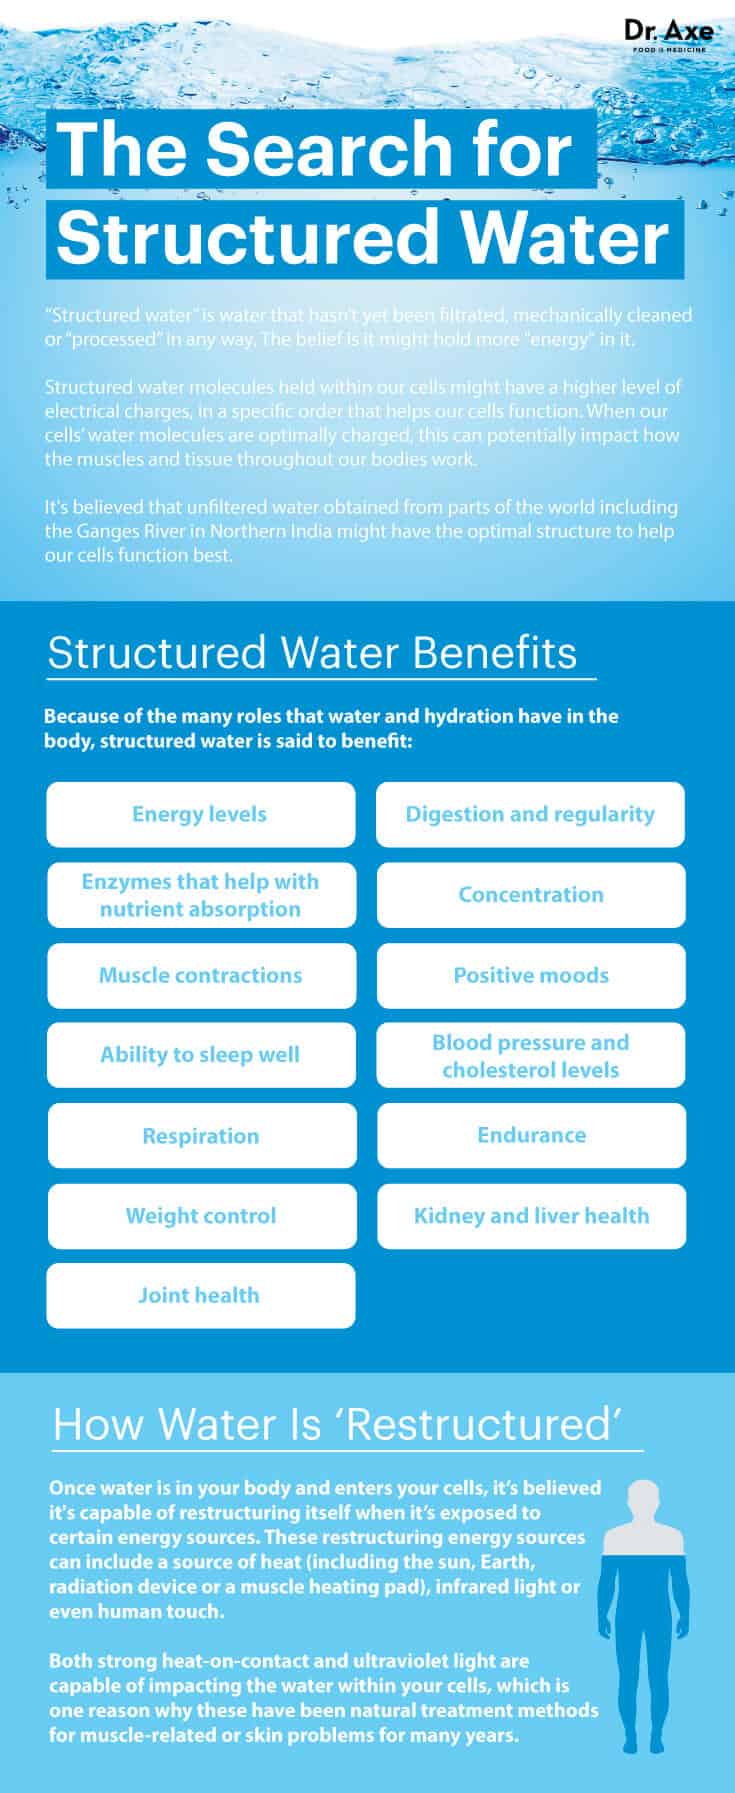 What is structured water?